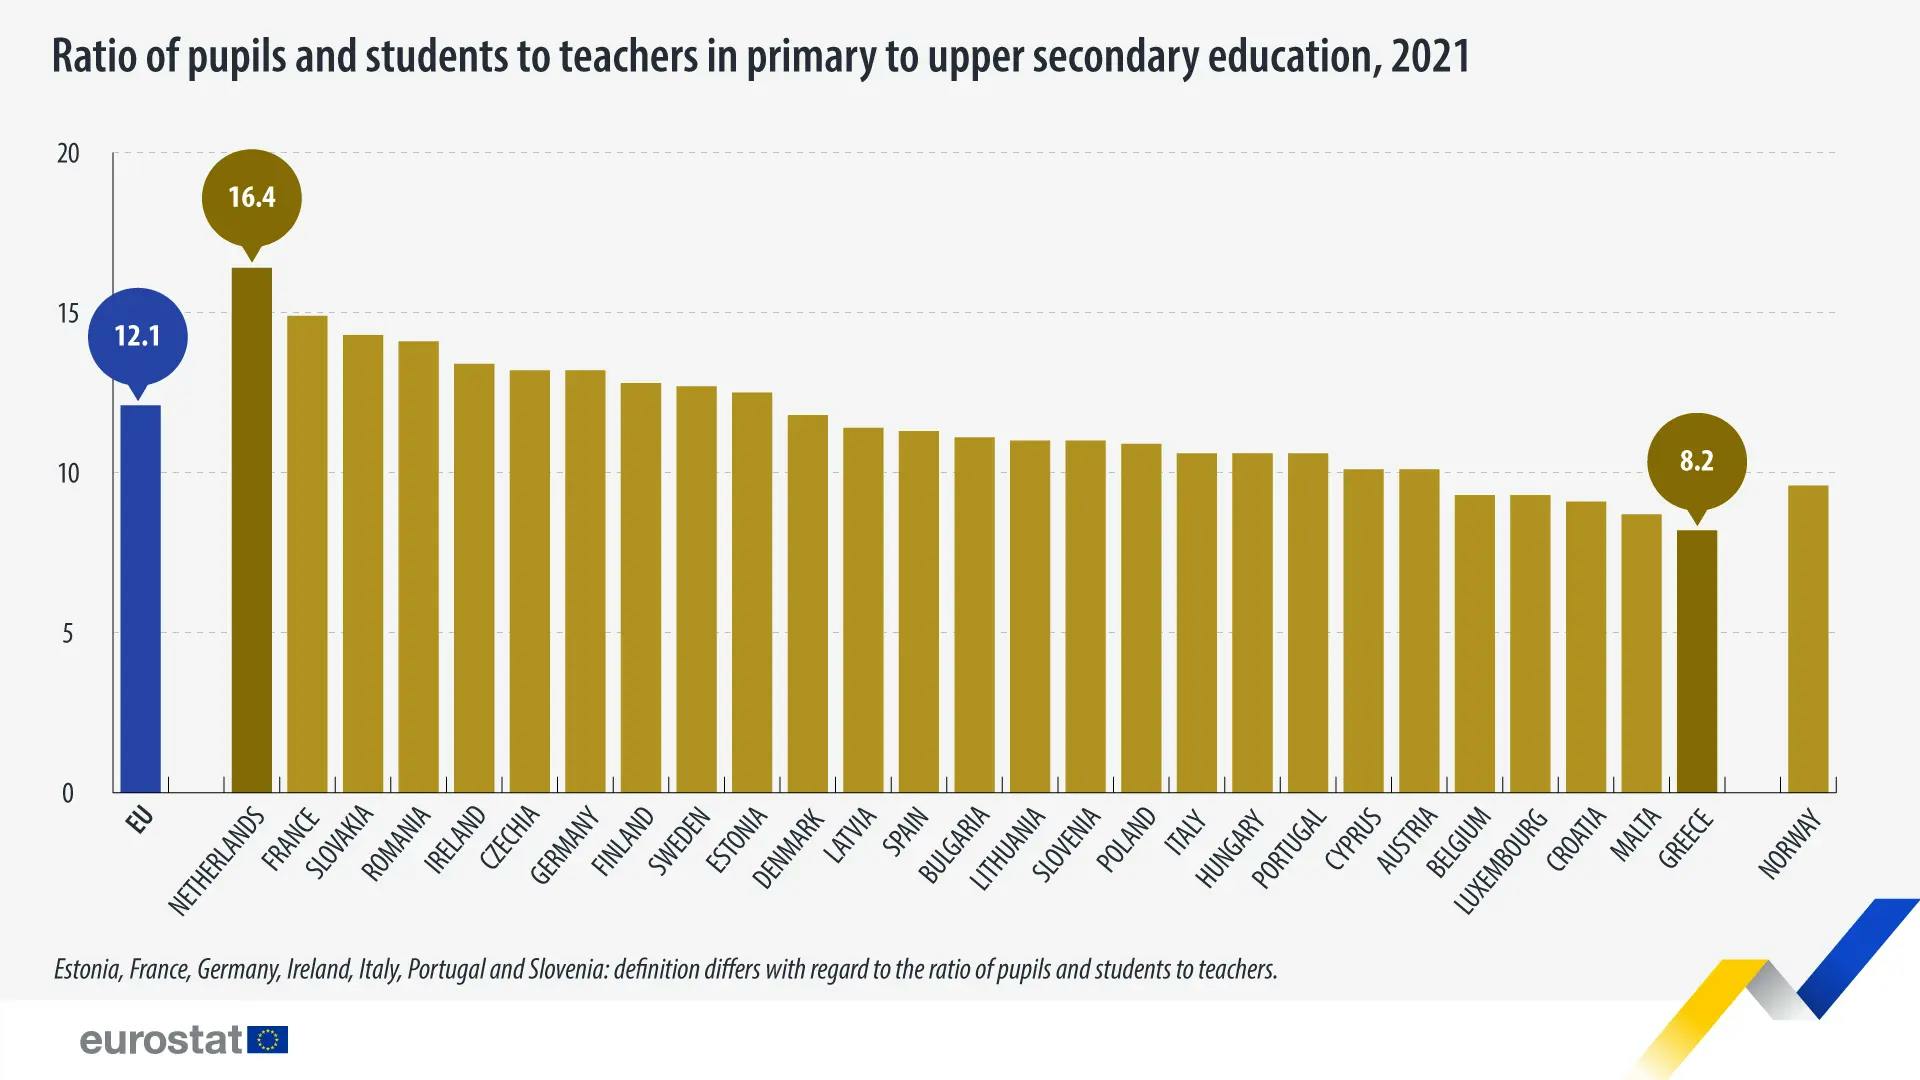 graph of distribution of pupils per 1 teacher in EU countries